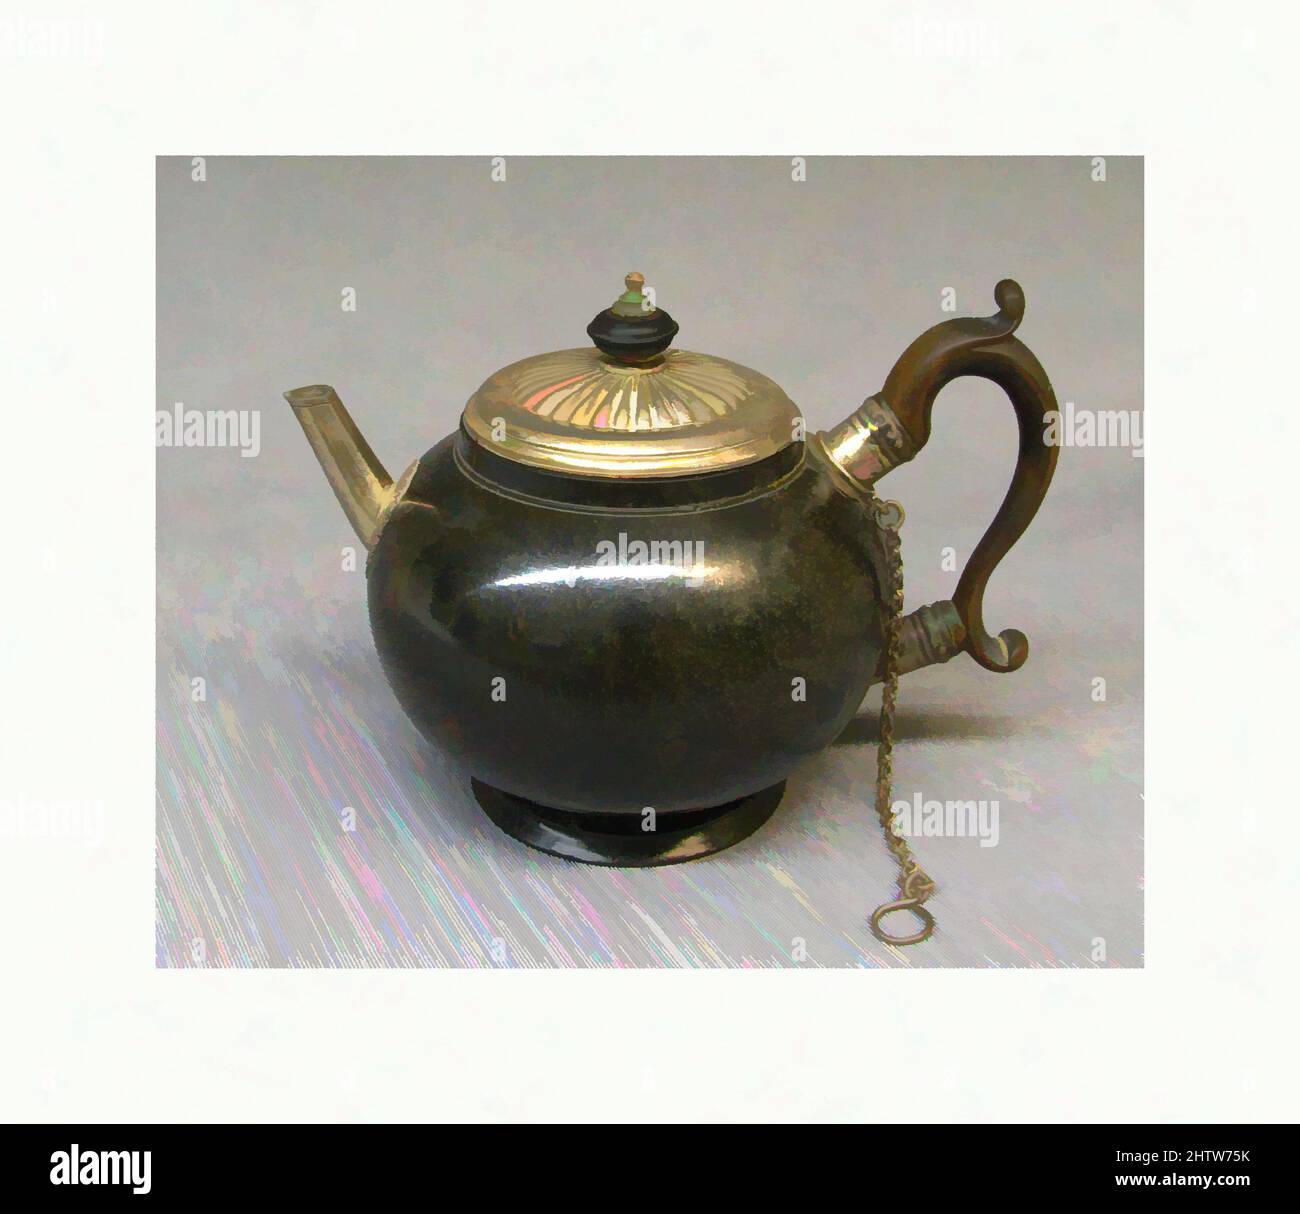 Art inspired by Teapot, ca. 1690, Dutch, Serpentine, silver and ebony, H. with cover: 4 11/16 in. (11.9 cm), Metalwork-Silver In Combination, Classic works modernized by Artotop with a splash of modernity. Shapes, color and value, eye-catching visual impact on art. Emotions through freedom of artworks in a contemporary way. A timeless message pursuing a wildly creative new direction. Artists turning to the digital medium and creating the Artotop NFT Stock Photo